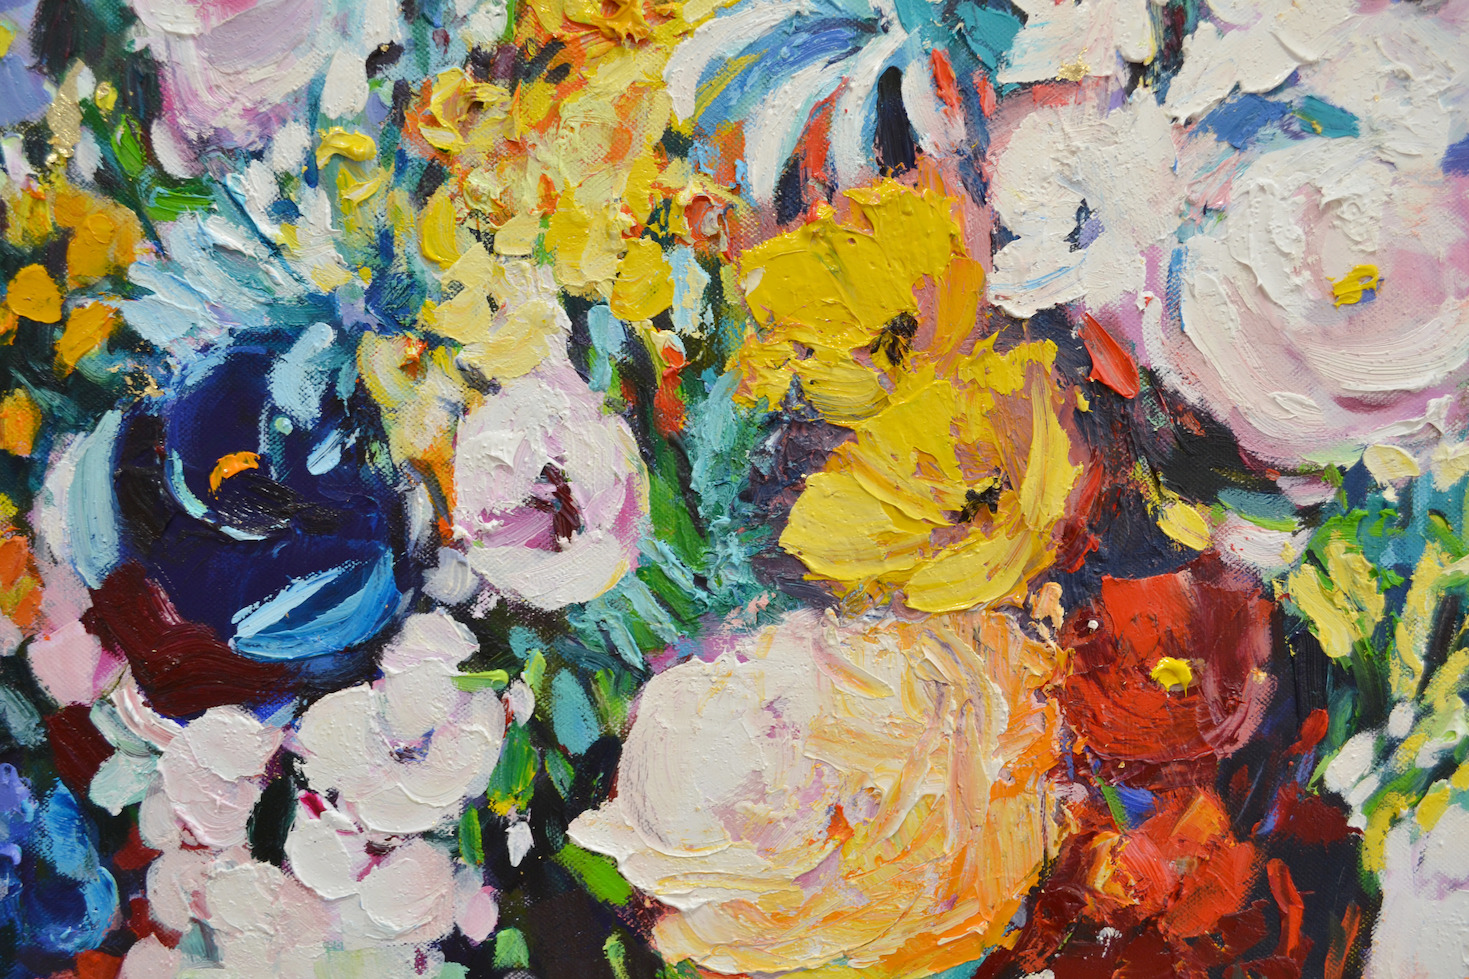 Close Up Detail Of Oil And Gold Leaf Painting "Shabby Chic Bouquet" By Judith Dalozzo